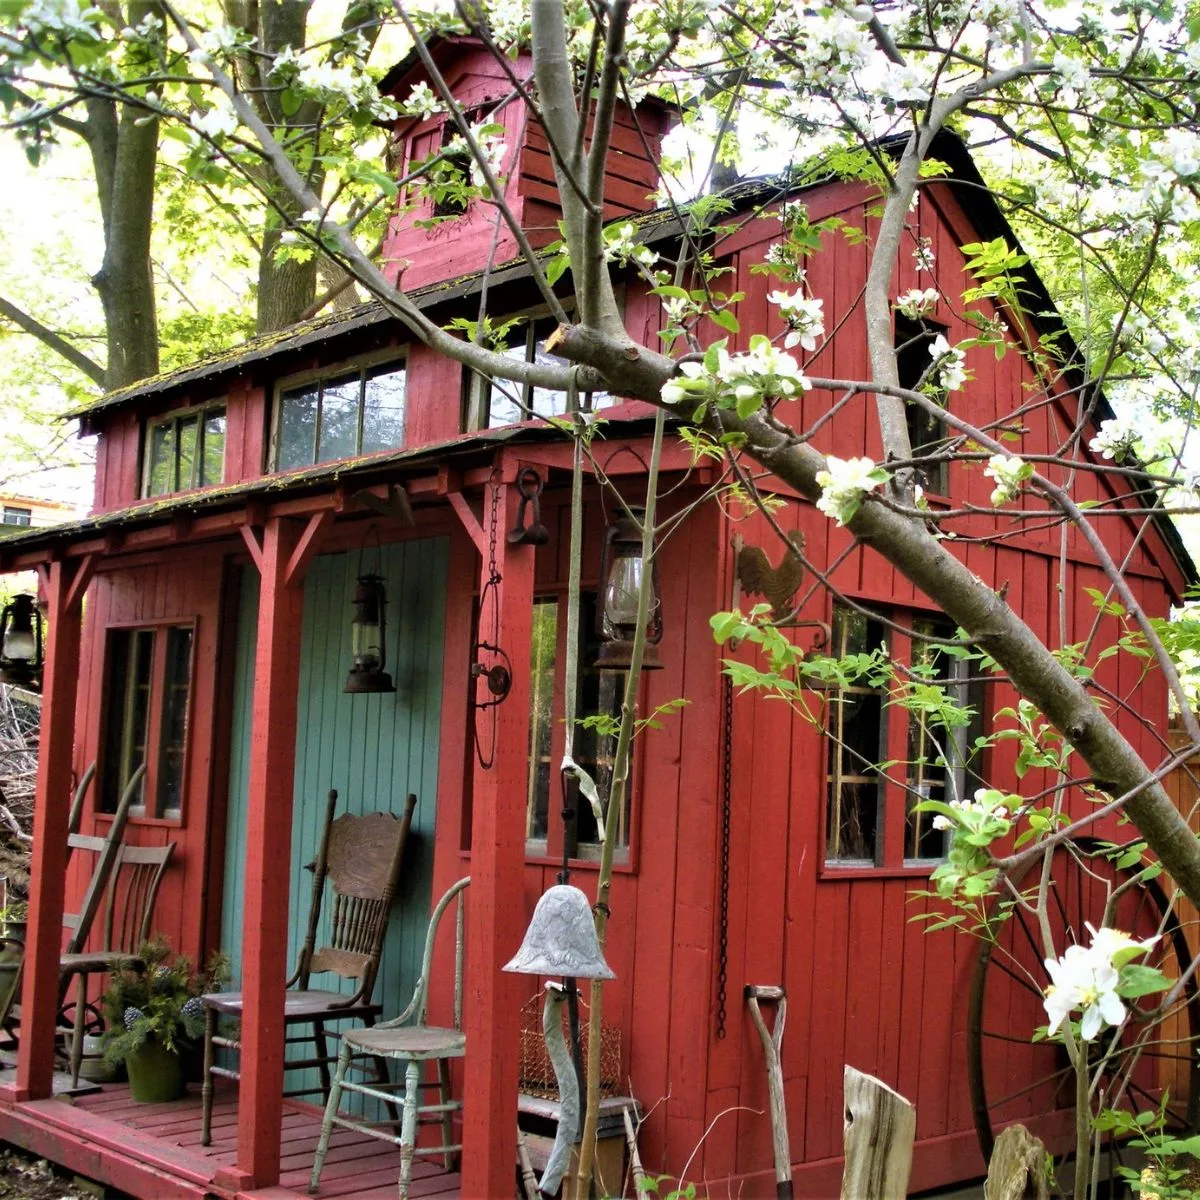 the old mill, a beautiful red building with a cozy sitting area on the porch